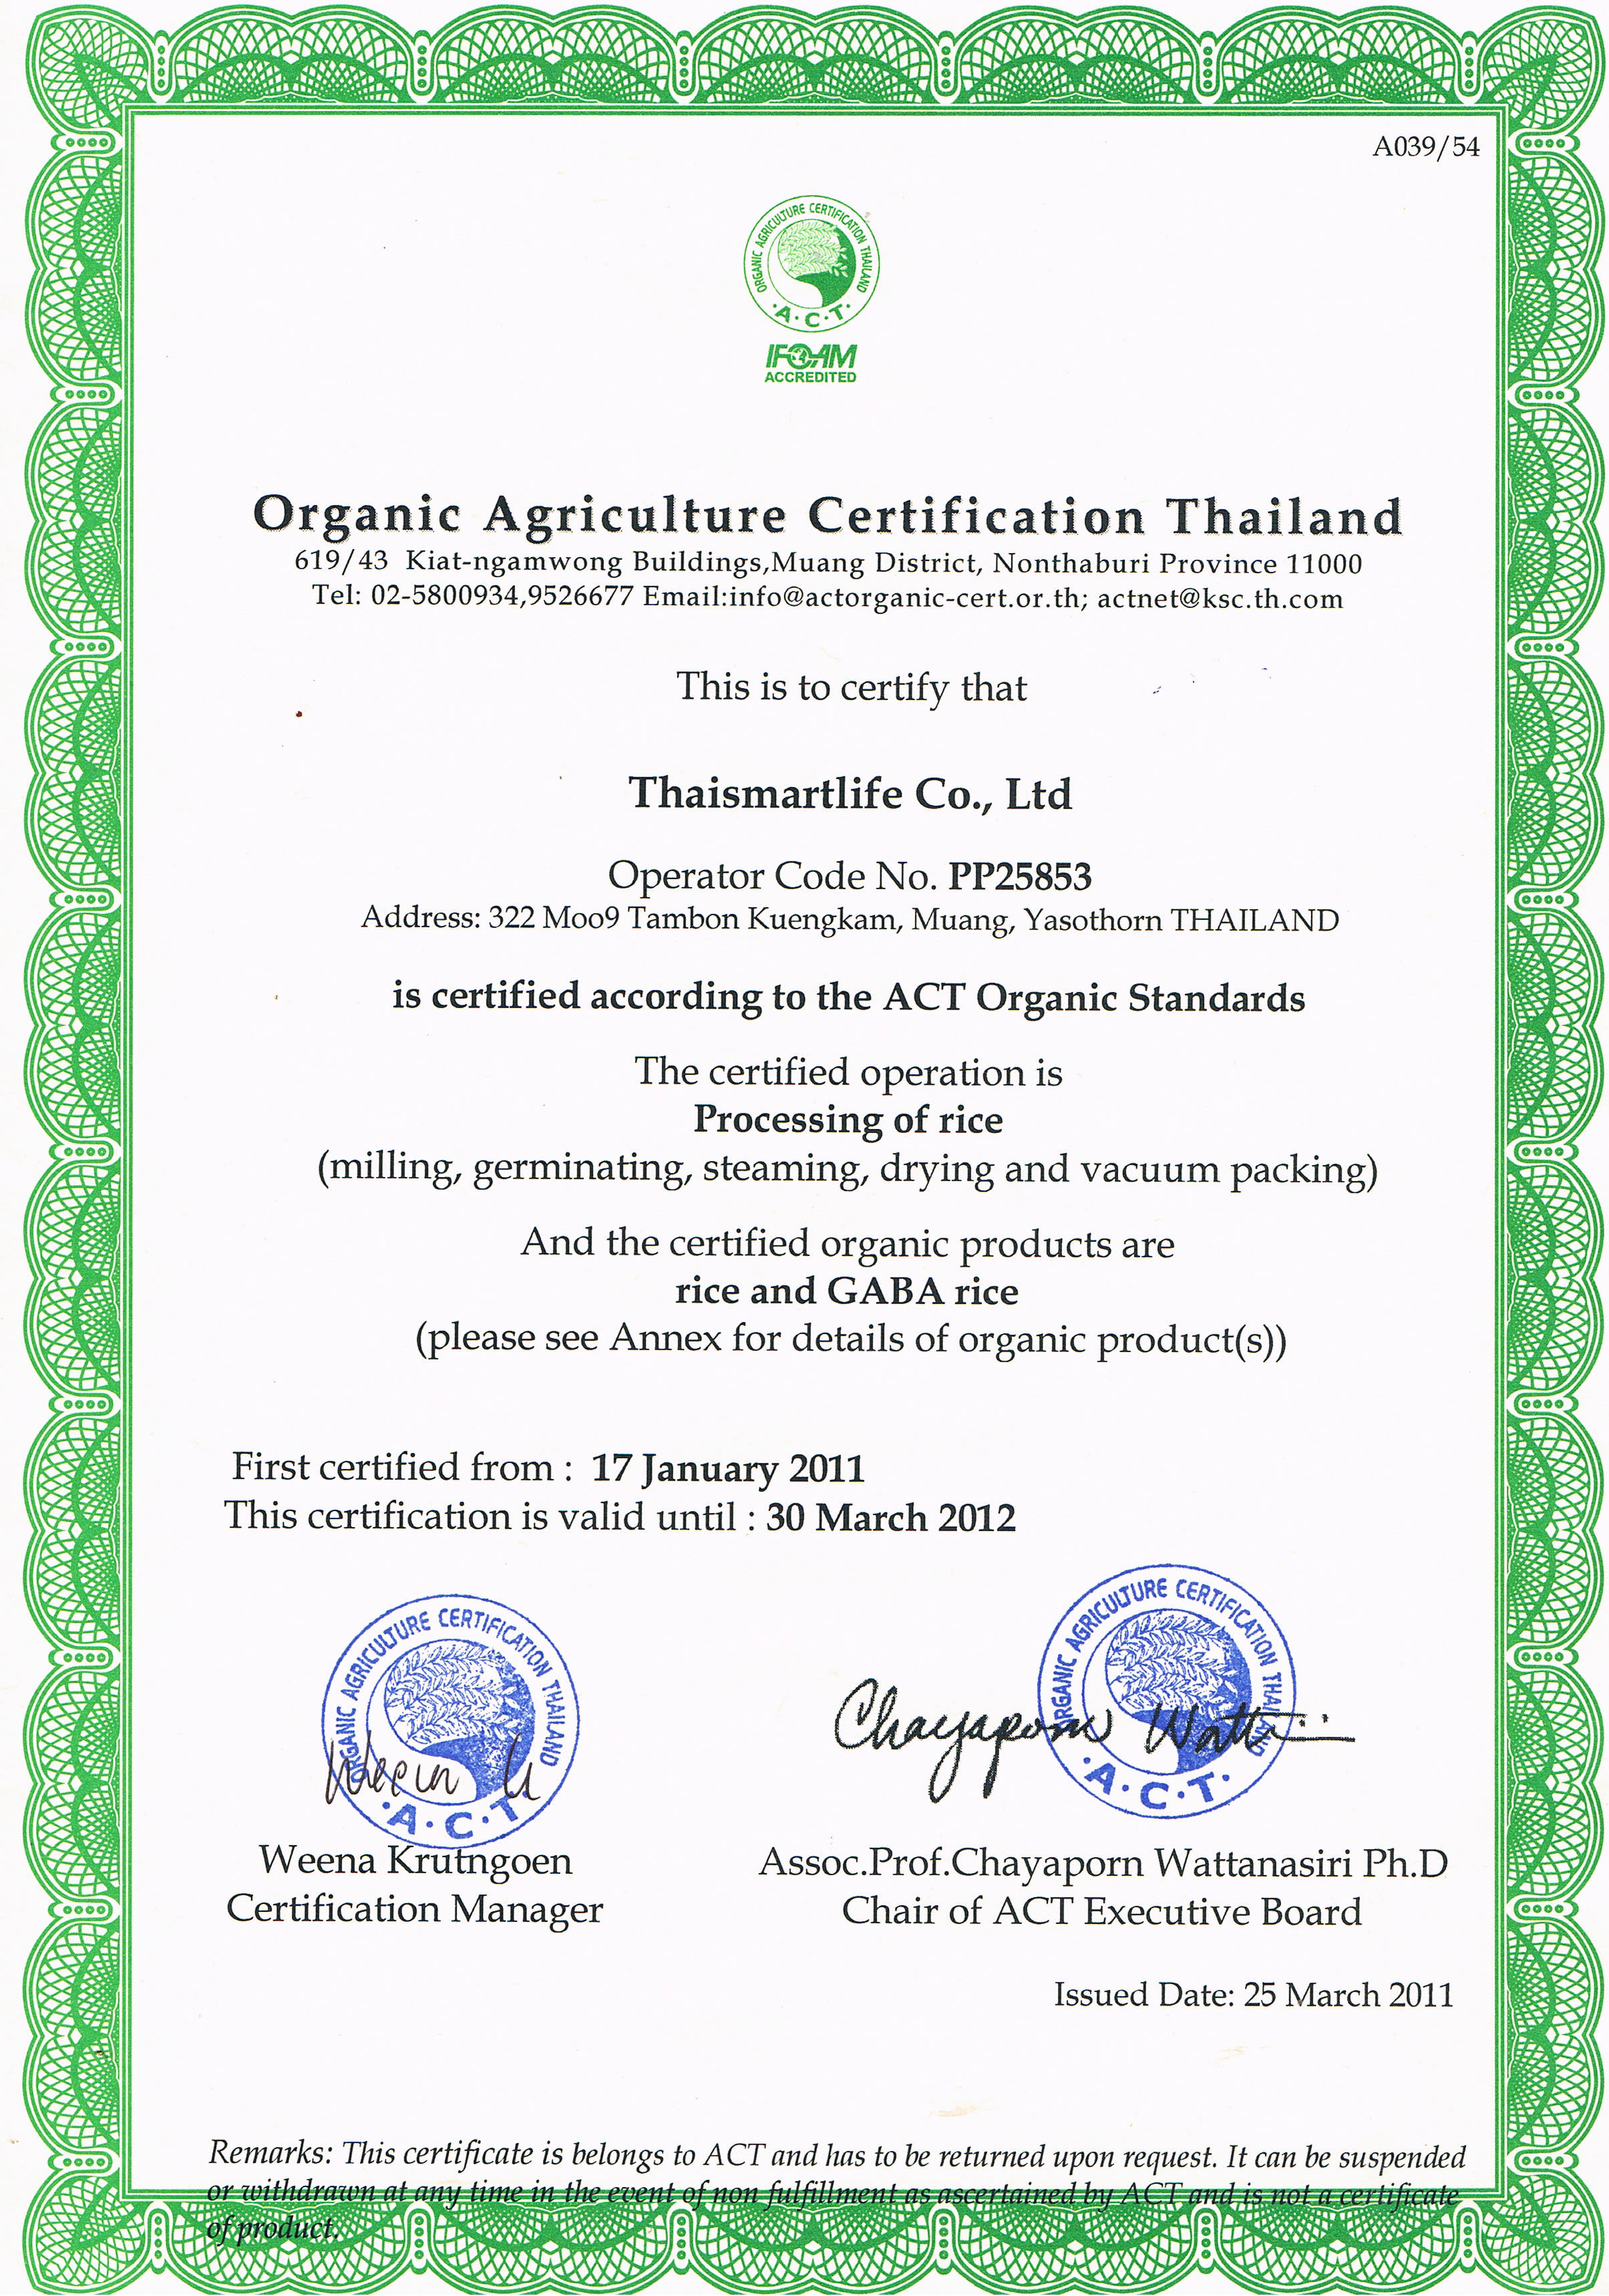 Organic Agriculture Certification Thailand 